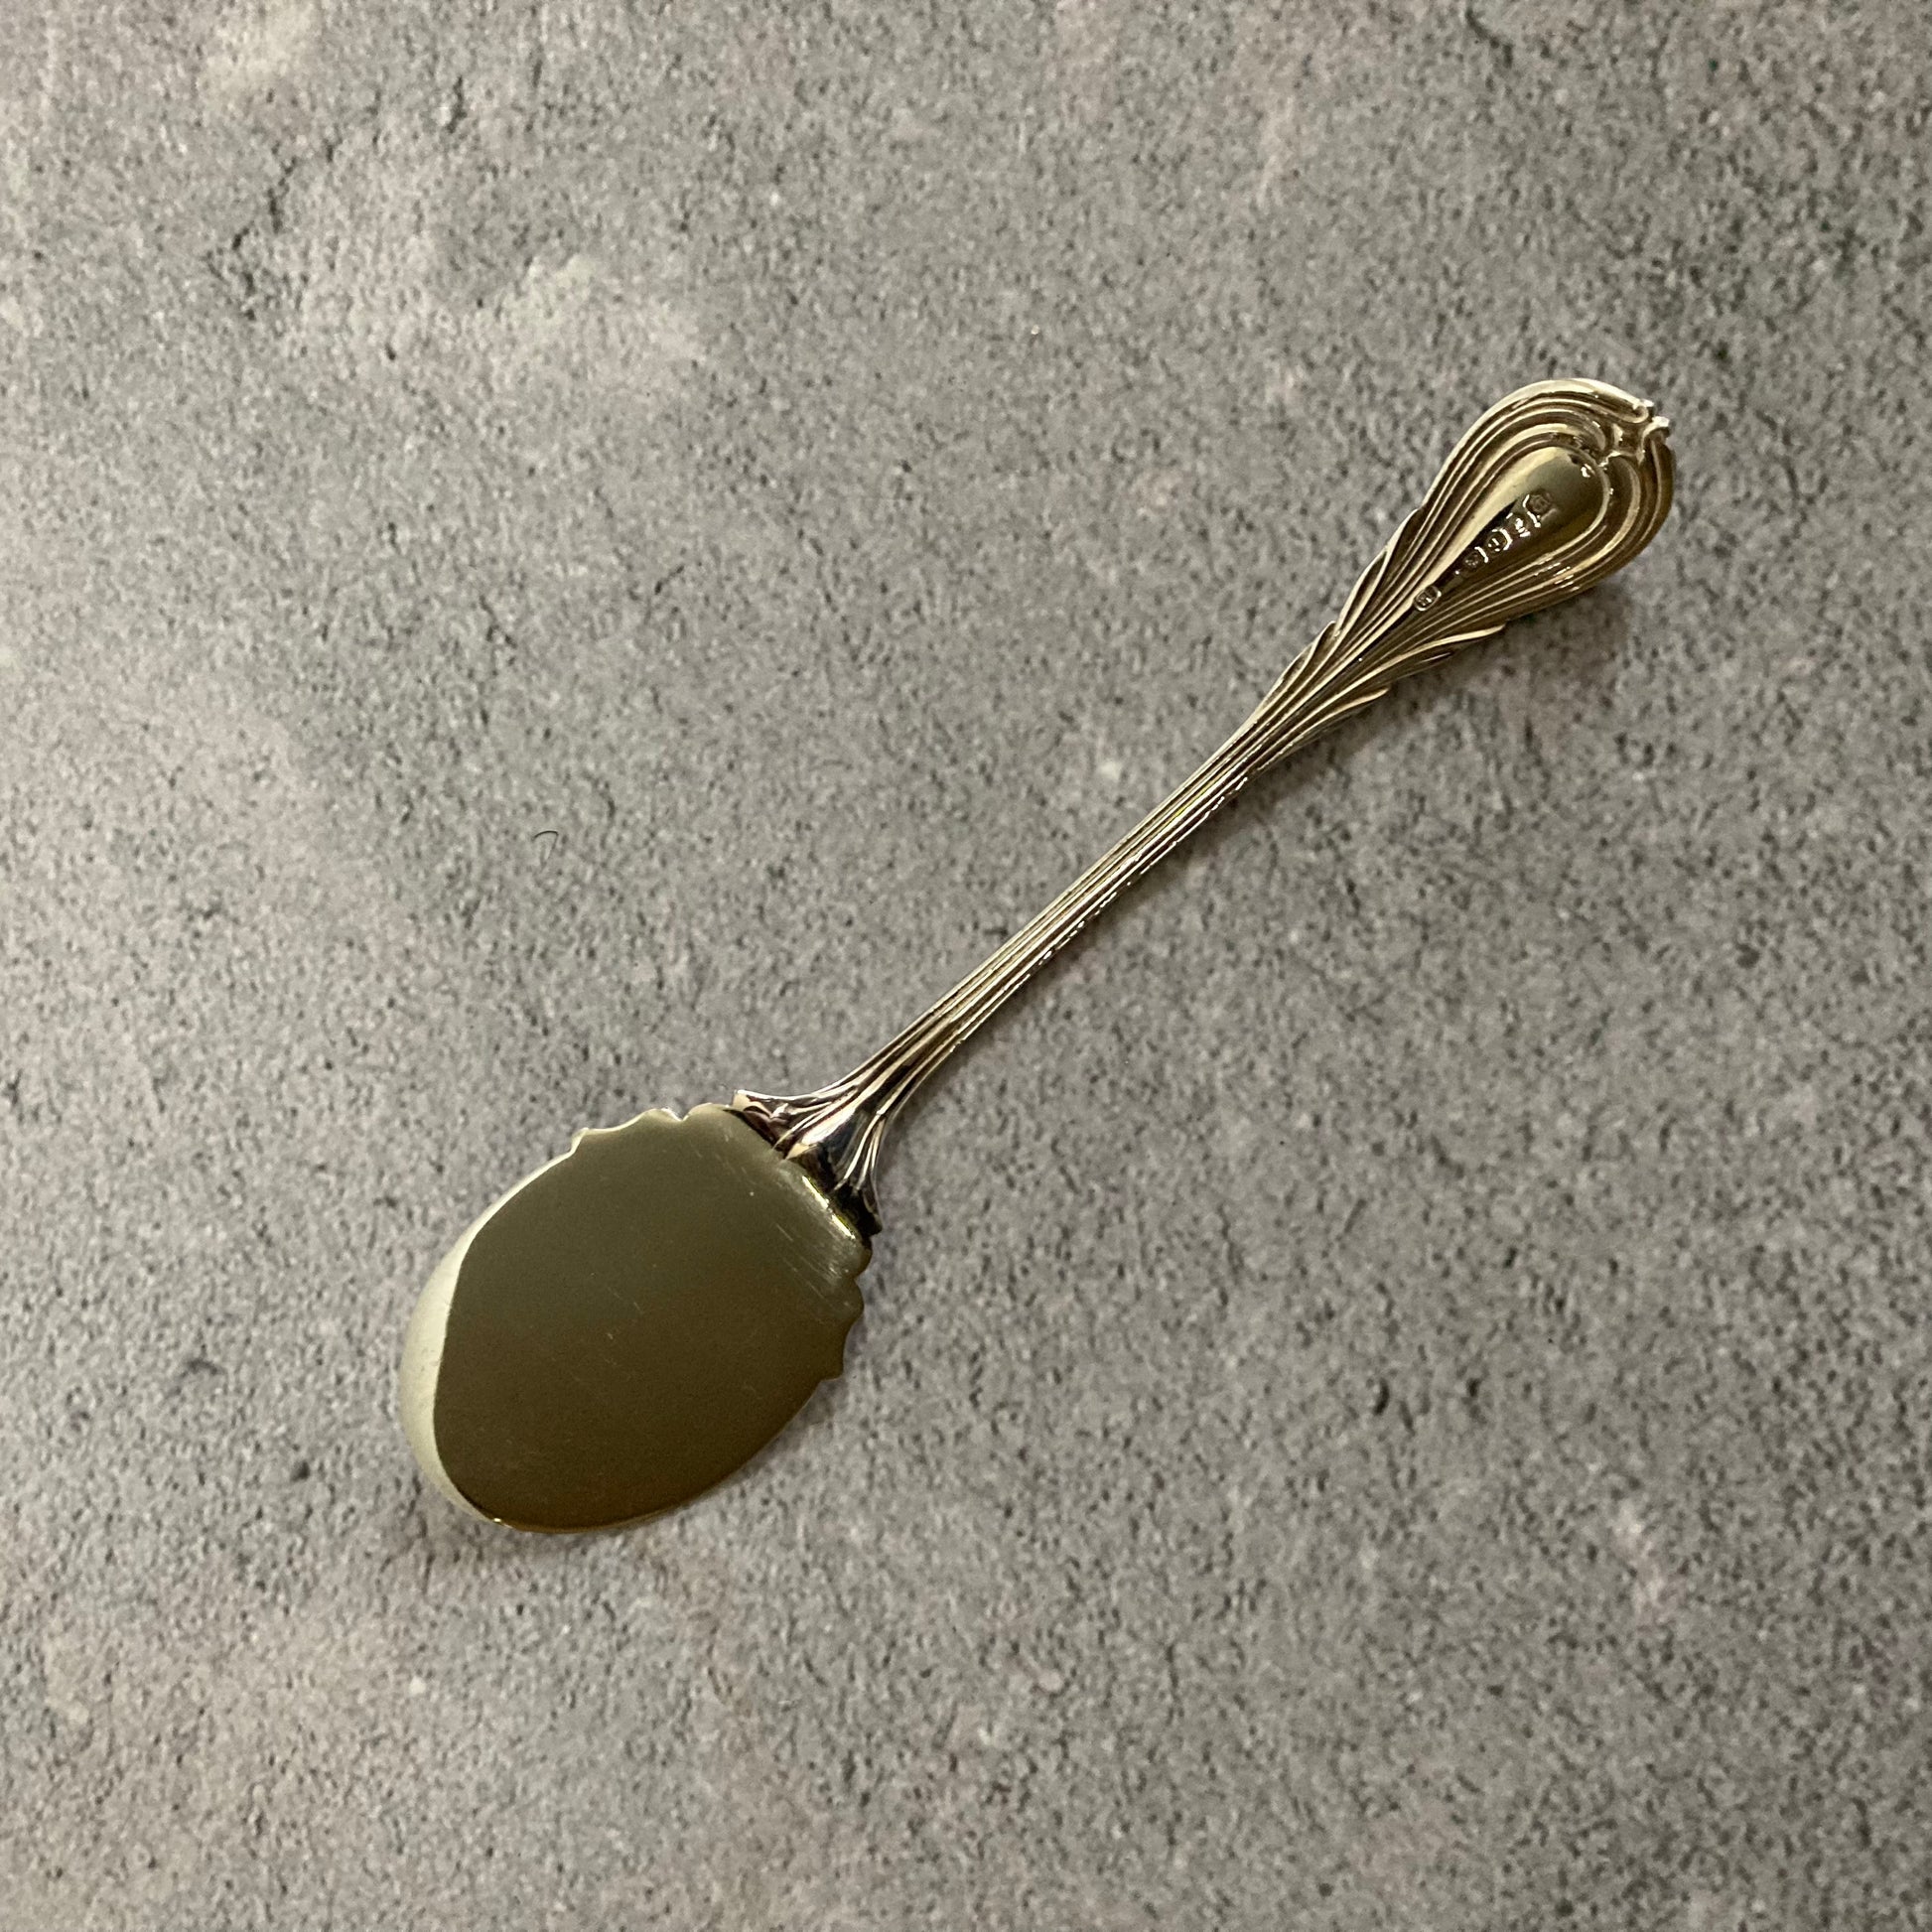 Antique Silver Plate Decorated Spoon | Fab Wedding Gift Idea